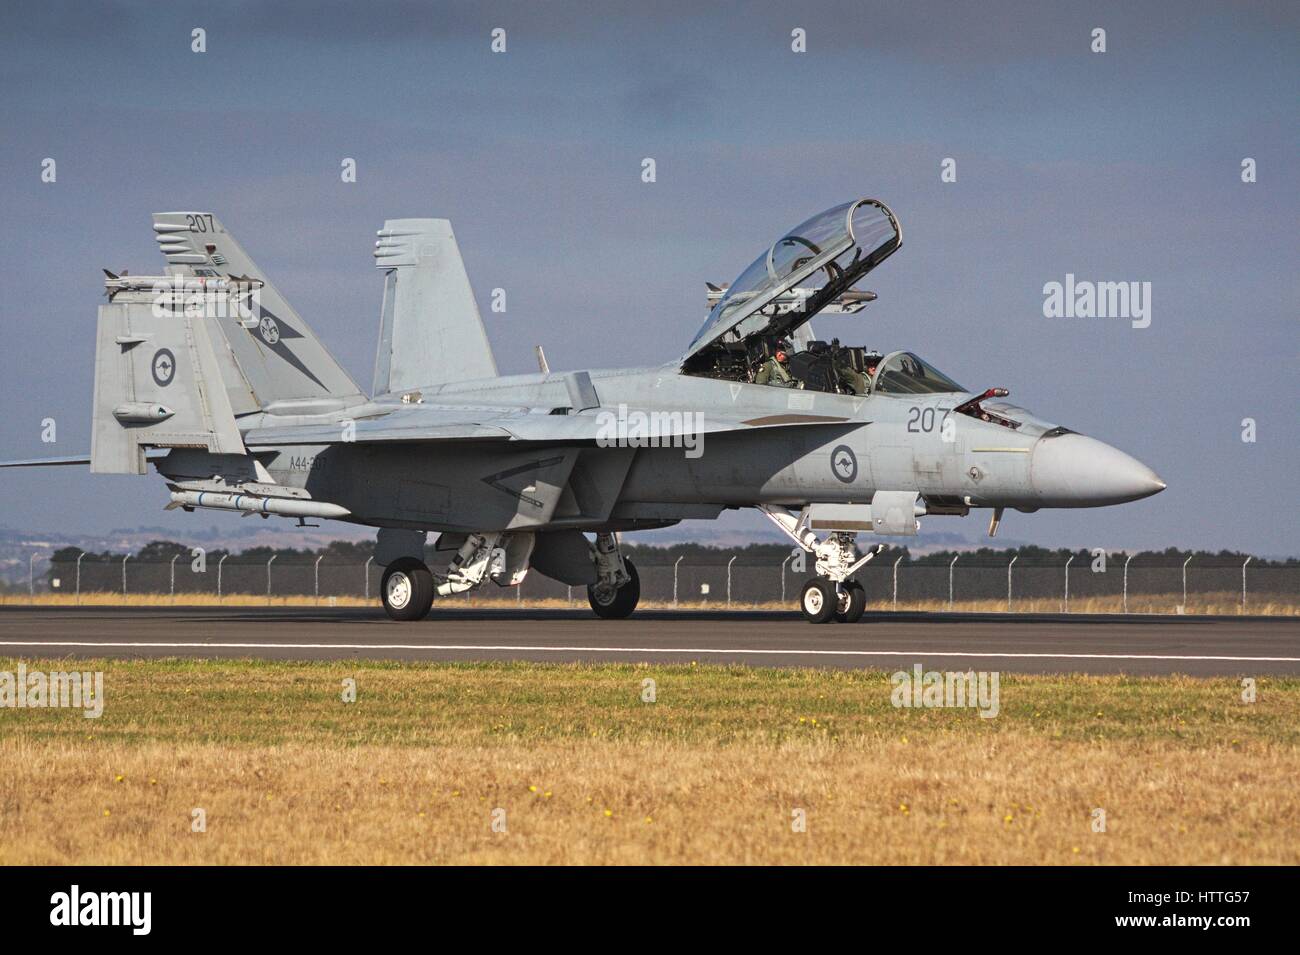 F/A-18F Super Hornet on the runway at the Avalon airshow, canopy open, Melbourne, Australia, 2017. Stock Photo